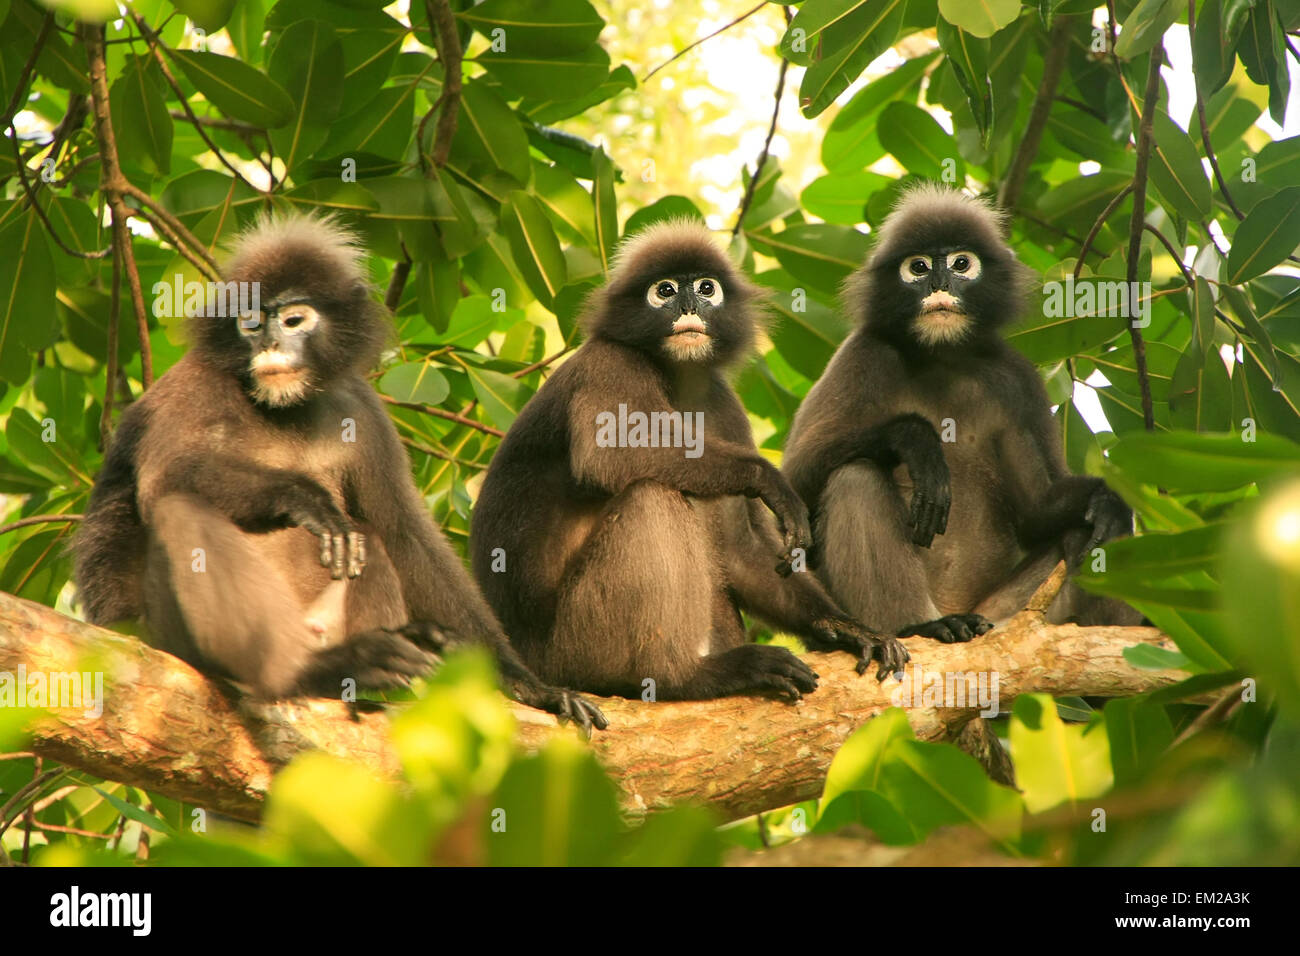 Spectacled langurs sitting in a tree, Wua Talap island, Ang Thong National Marine Park, Thailand Stock Photo